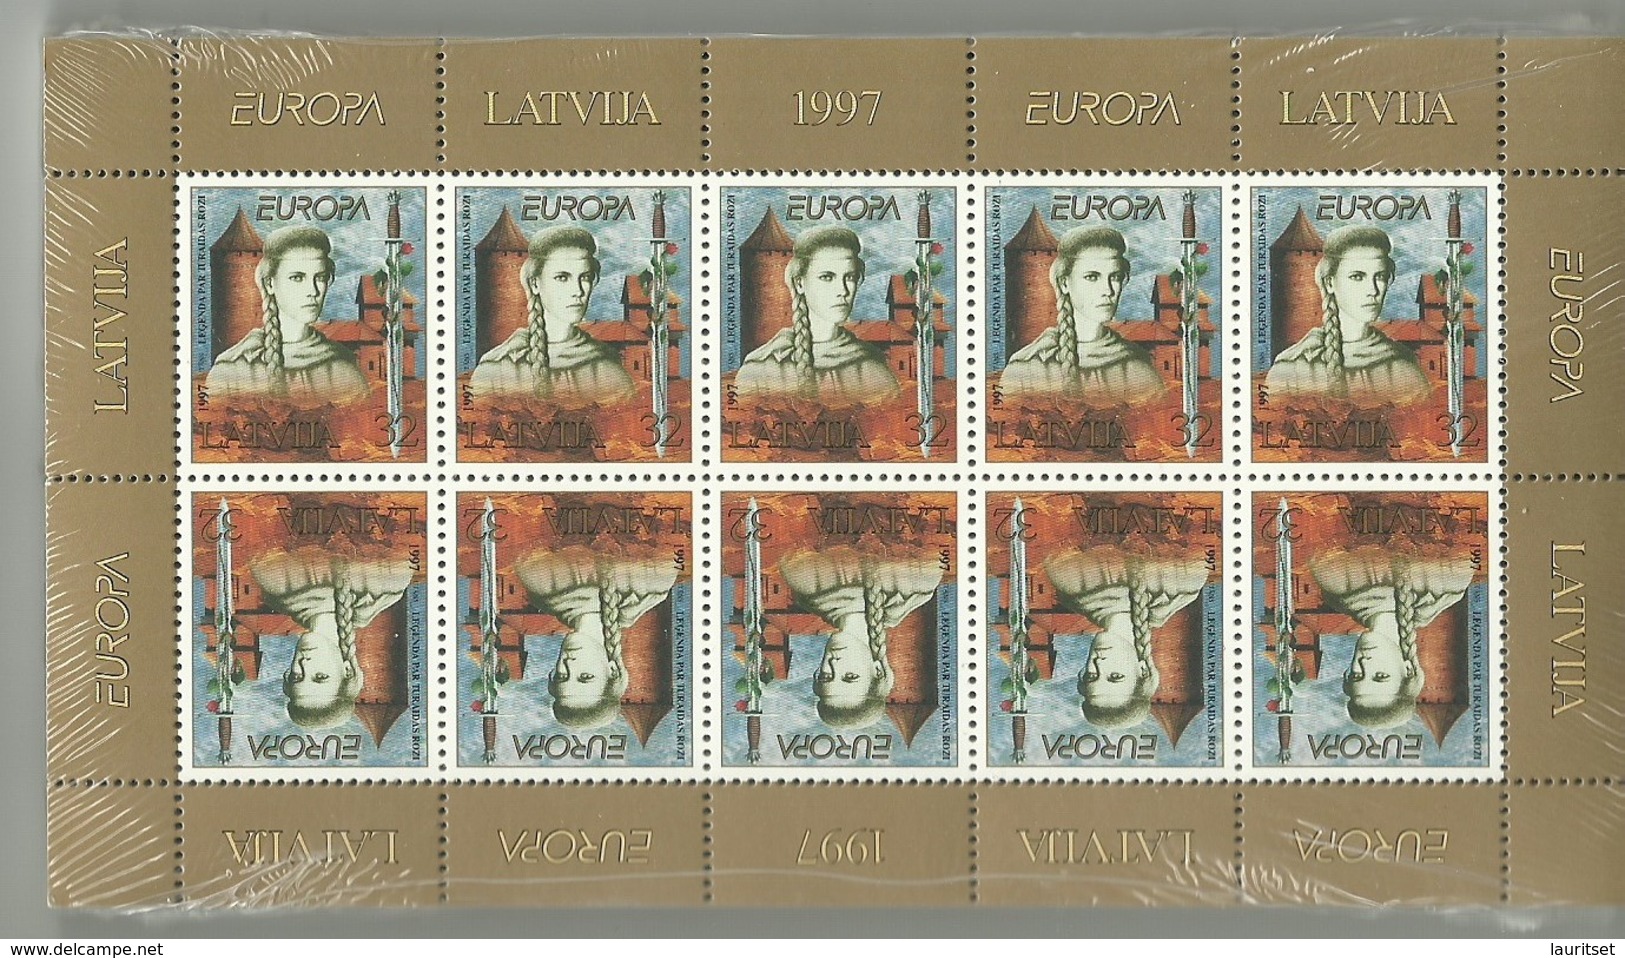 LETTLAND Latvia 1997 Michel 453 = 100 Sheets X 10 Stamps = 1000 Stamps Europa CEPT  MNH - Lettland